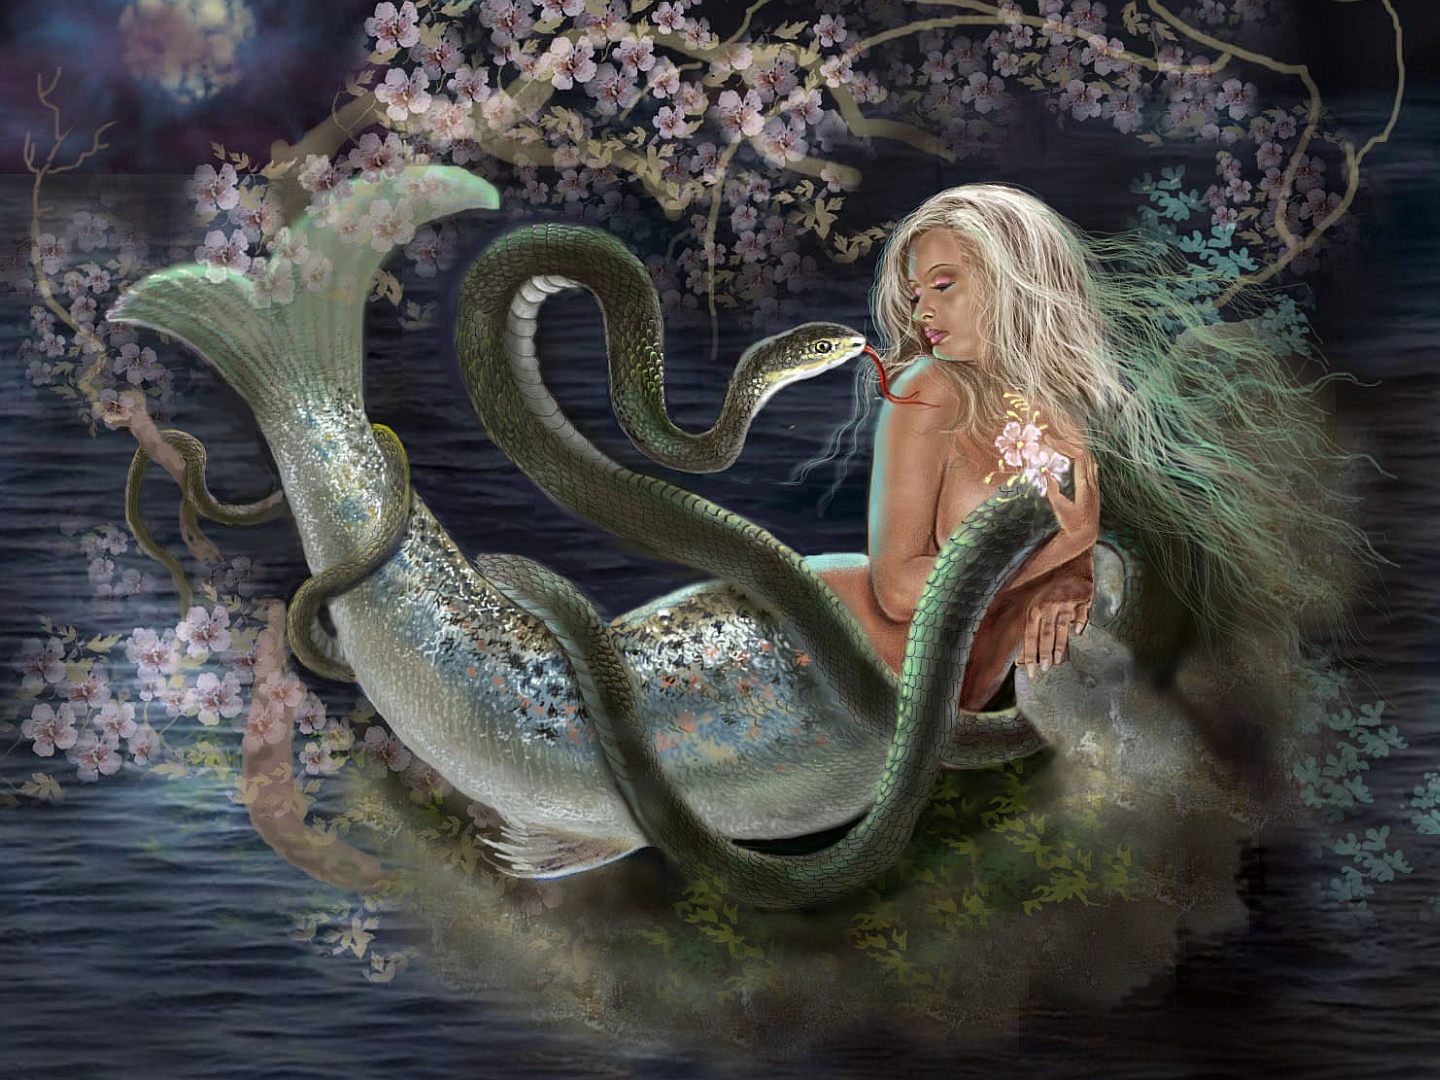 Mermaid Wallpapers Pictures Images HD Wallpapers Download Free Images Wallpaper [wallpaper981.blogspot.com]